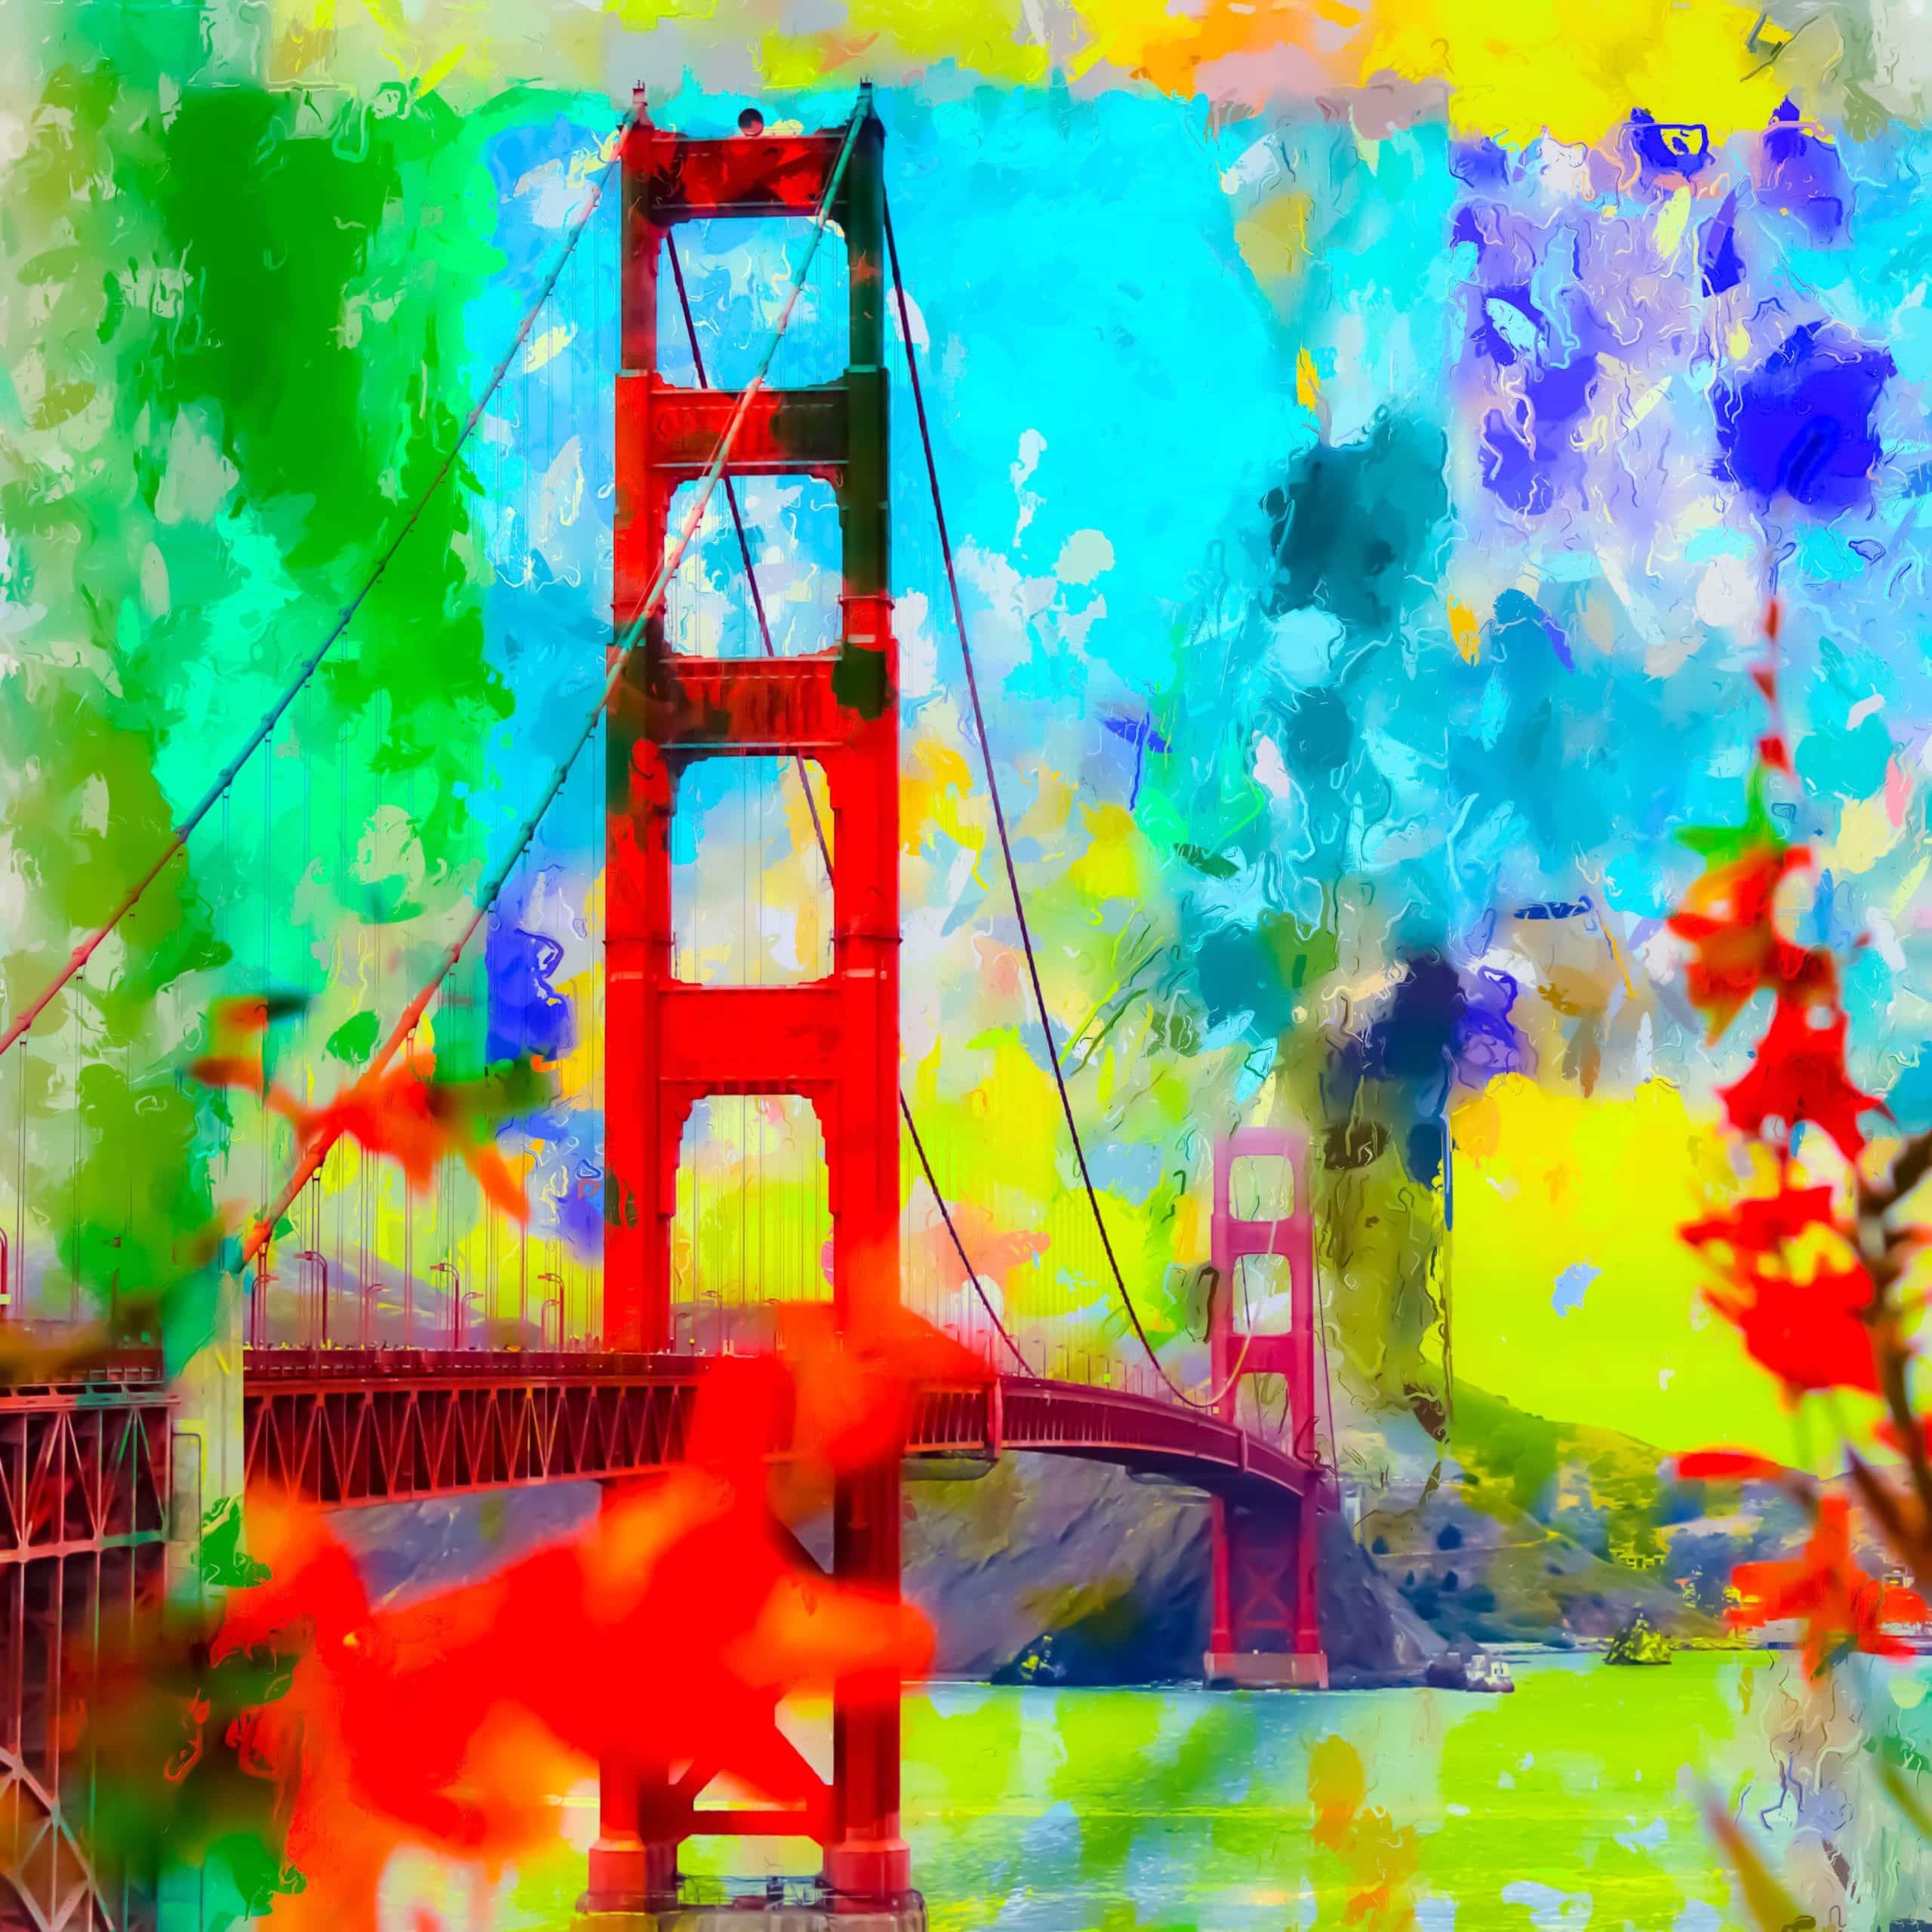 San Francisco Joins the Ranks with A Psychedelics Decriminalization